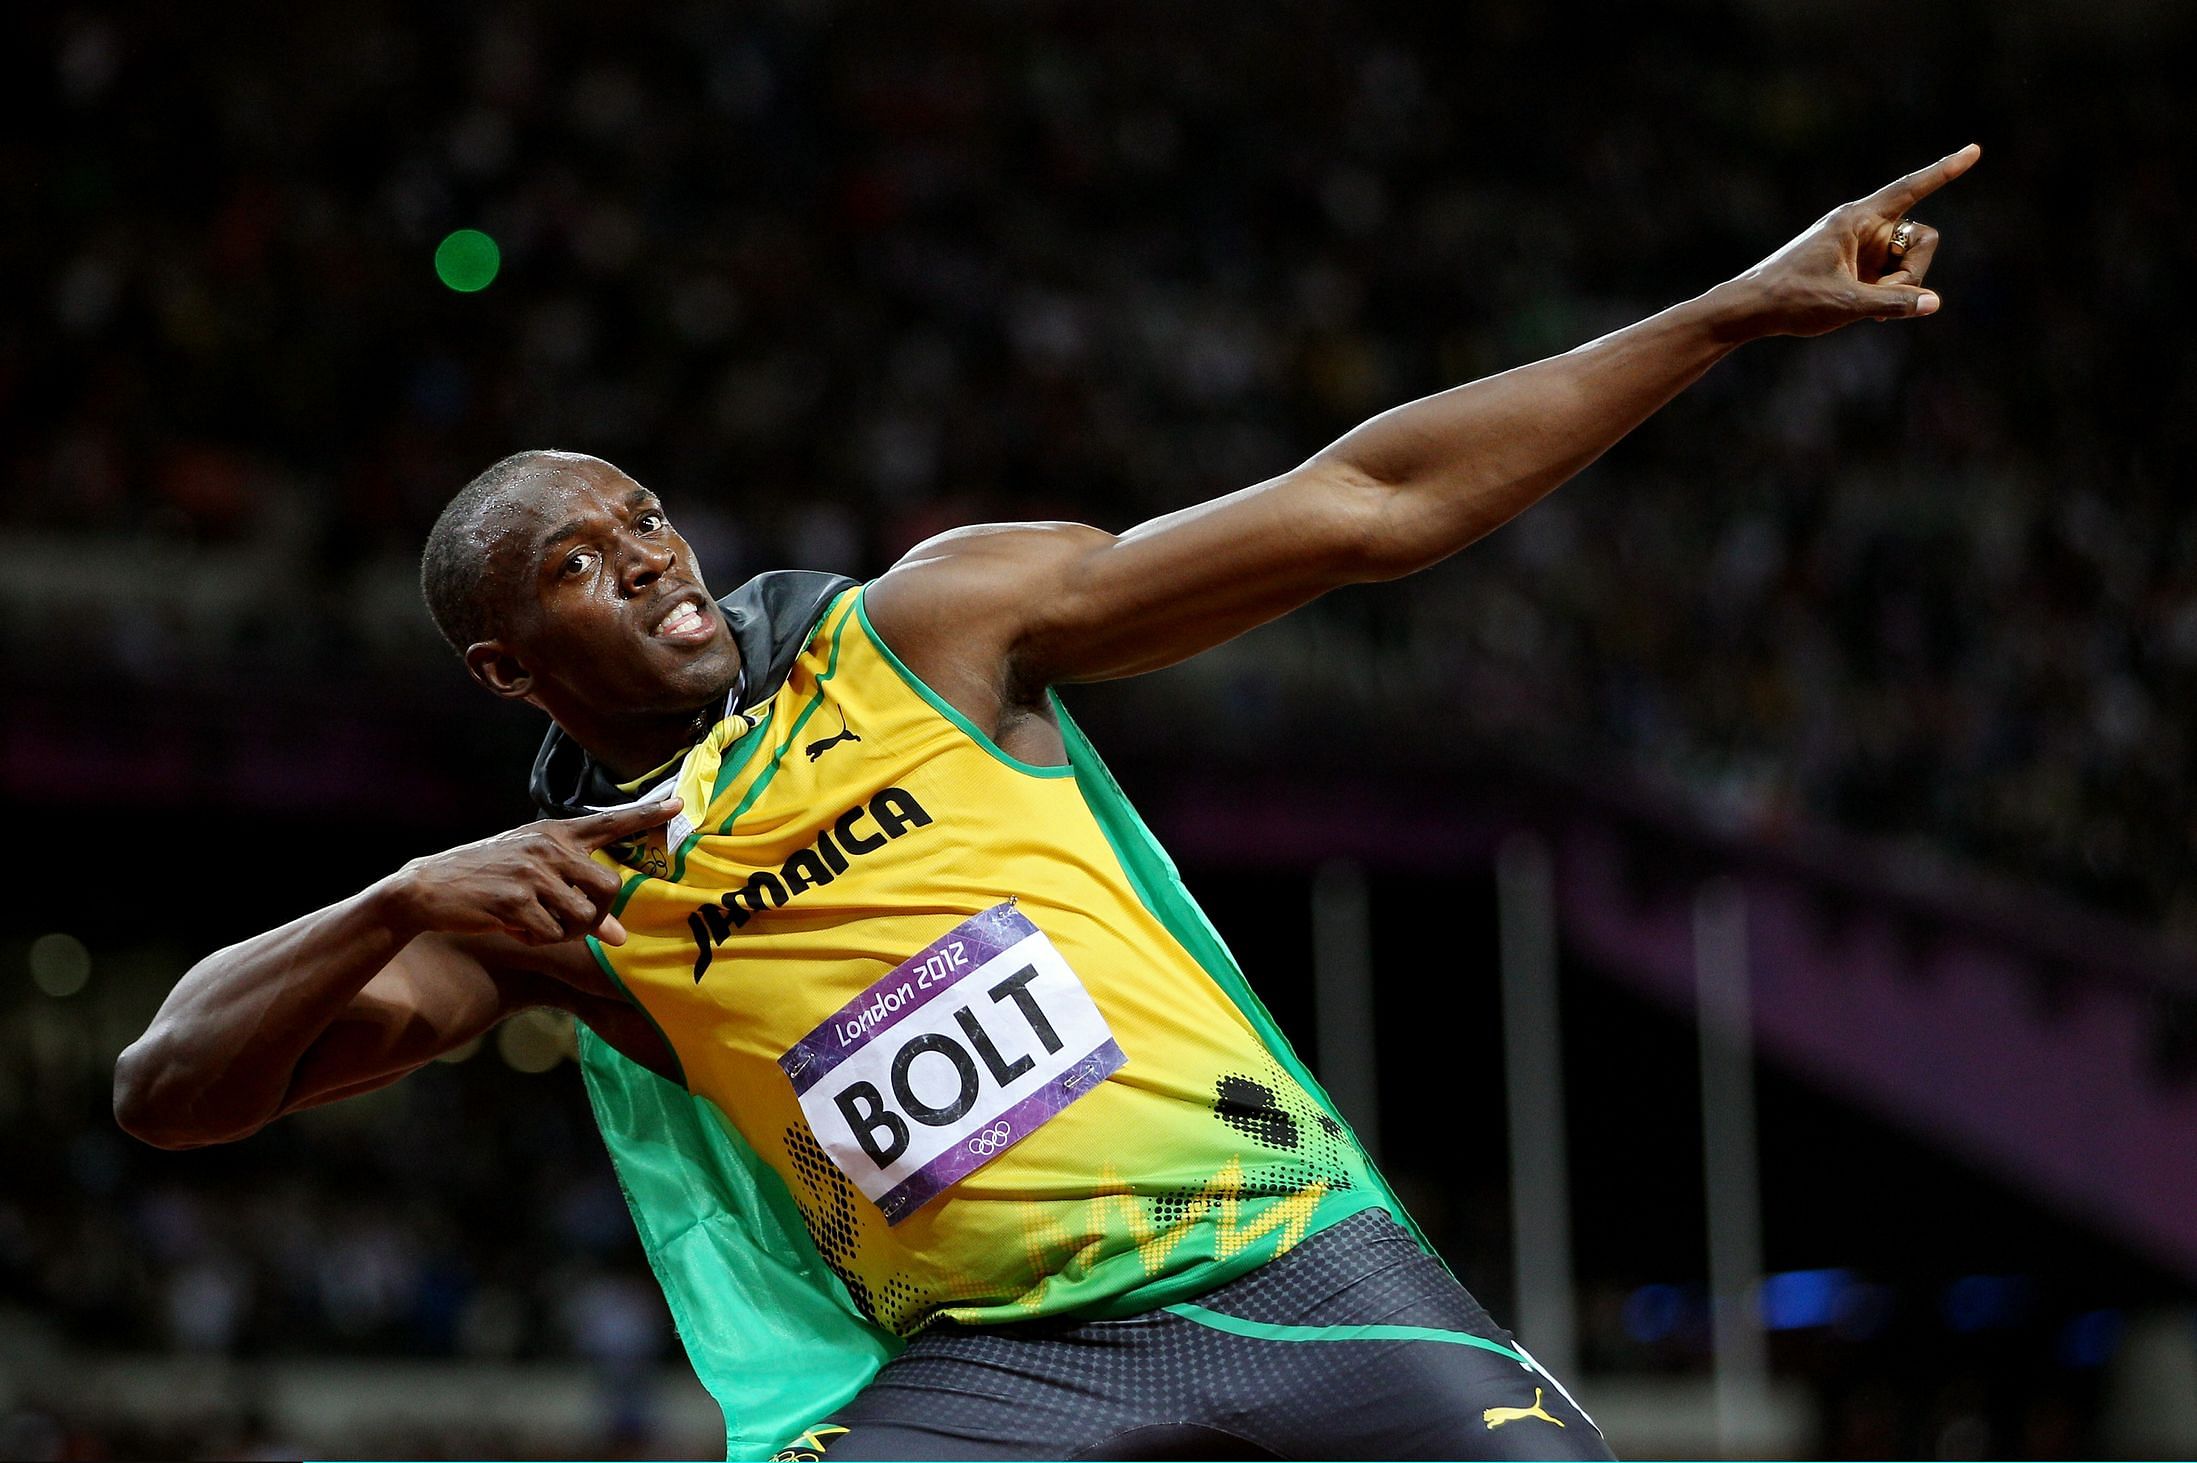 Usain Bolt to retire after 2017 World Championships